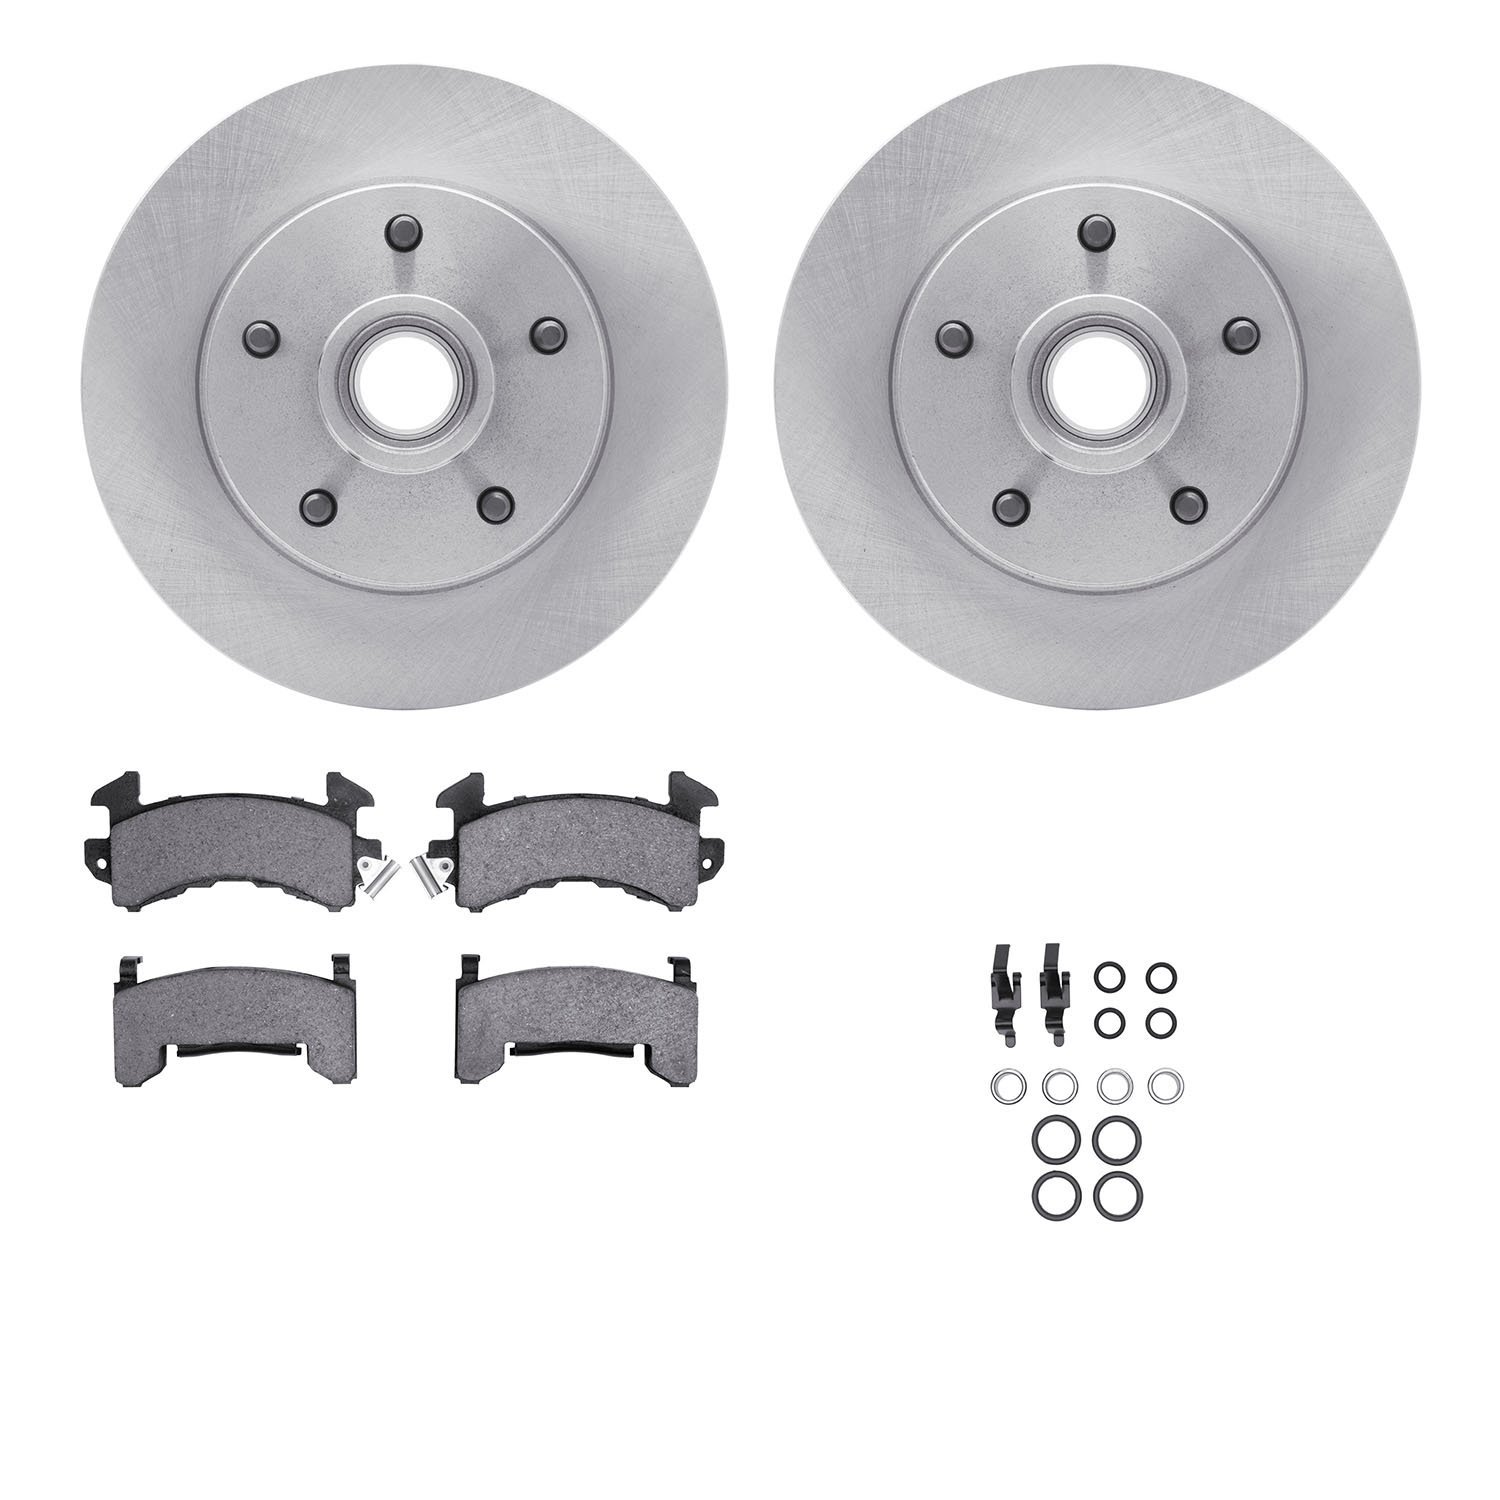 6412-47010 Brake Rotors with Ultimate-Duty Brake Pads Kit & Hardware, 1978-1978 GM, Position: Front